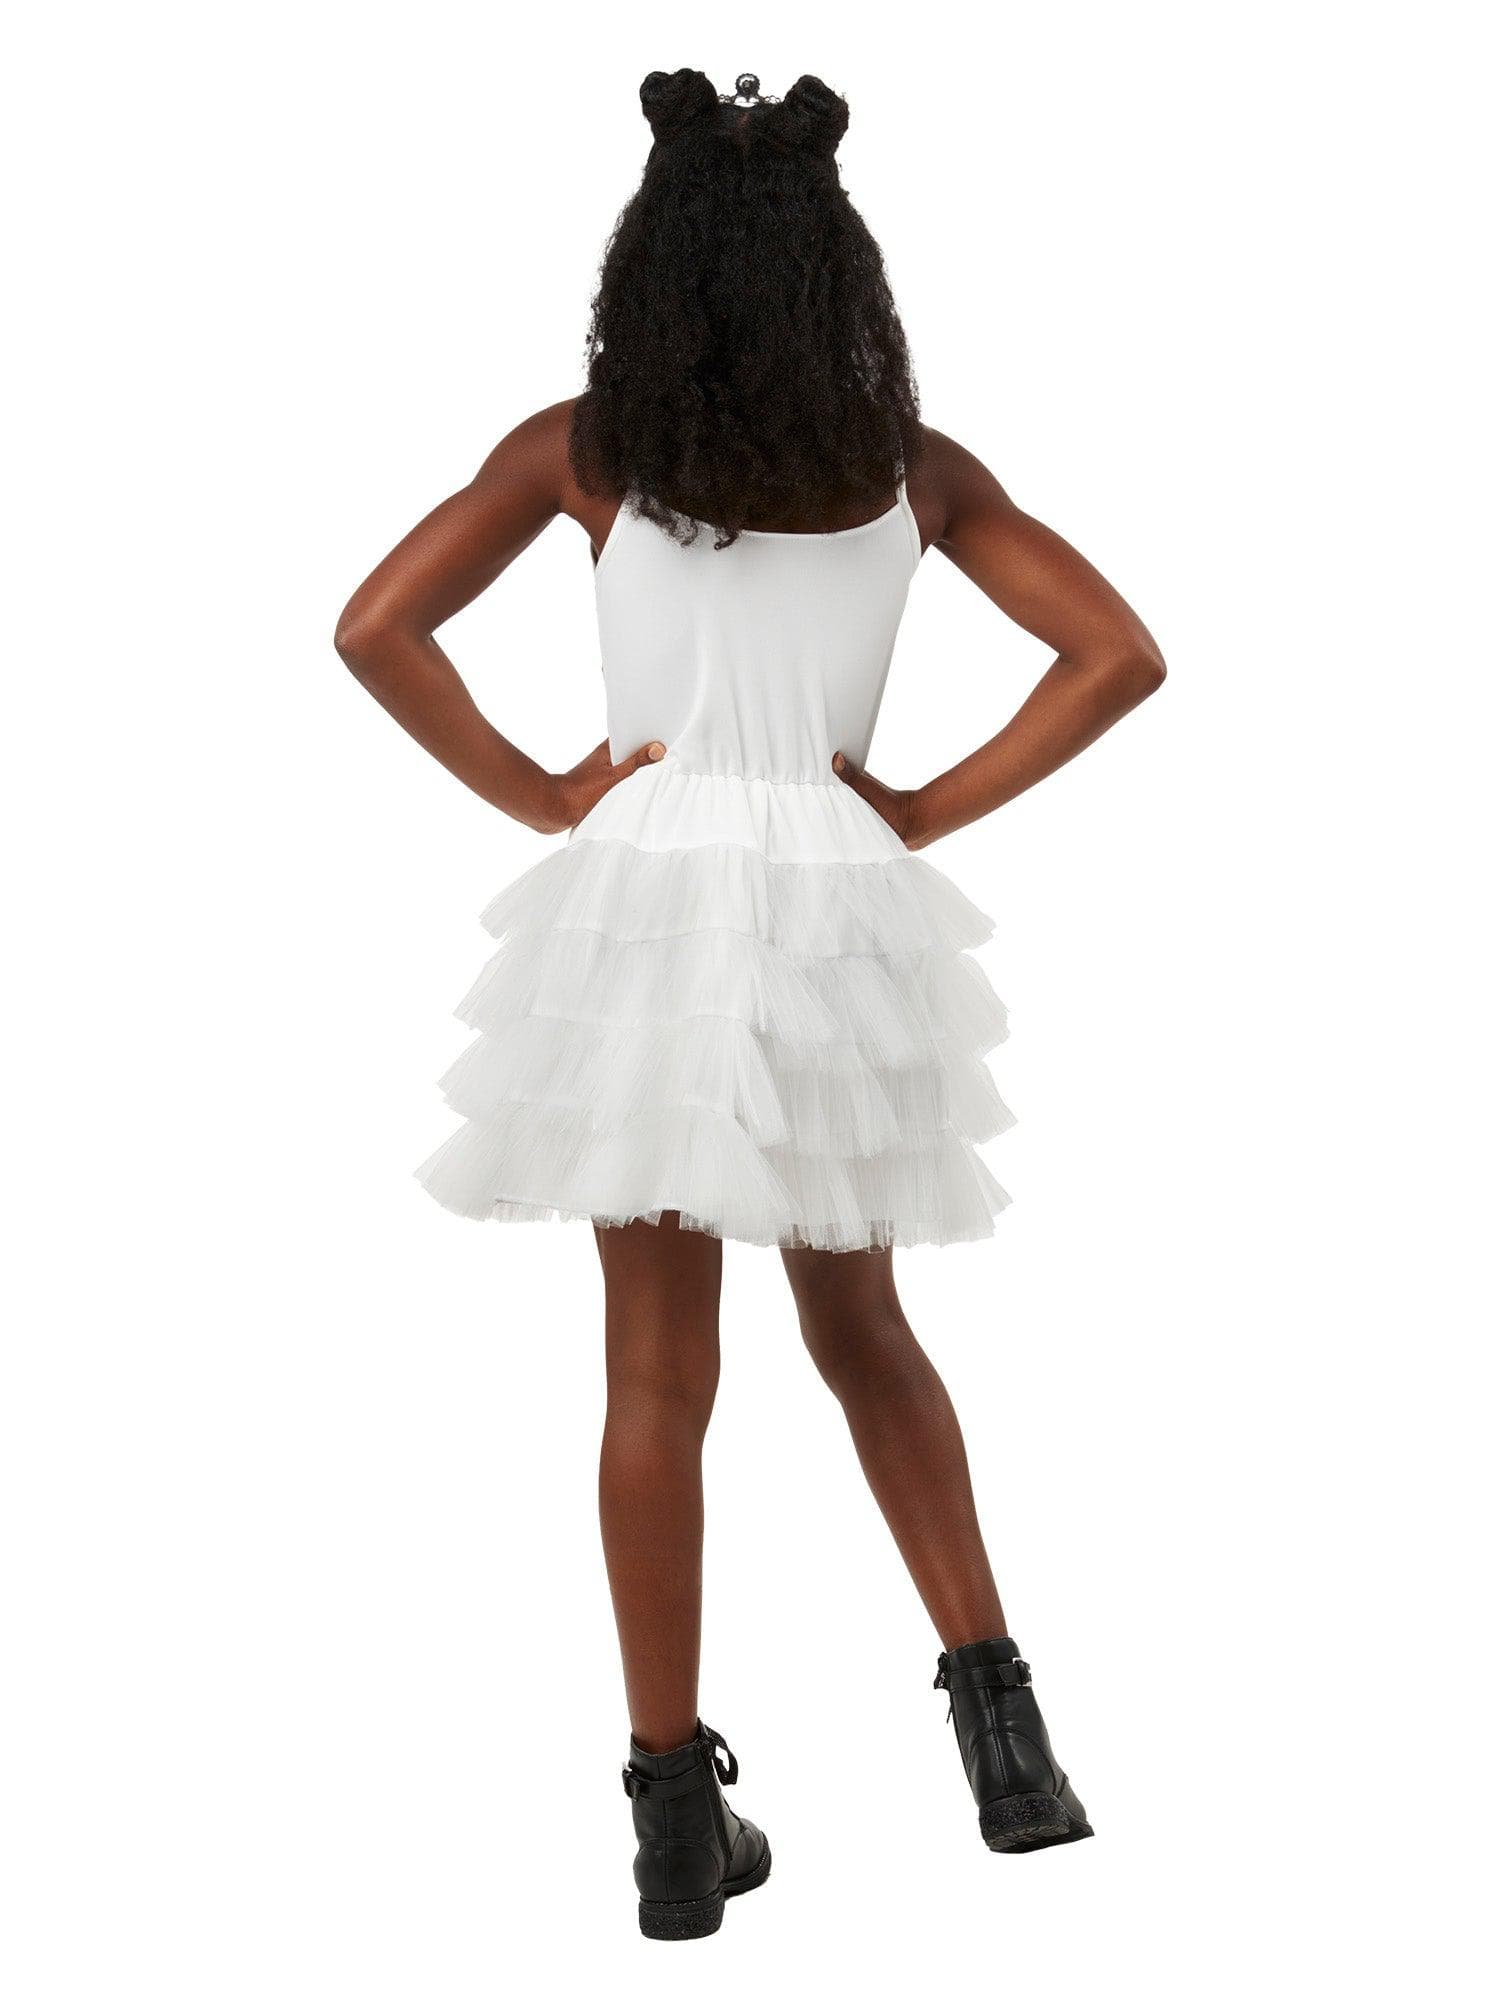 That Girl Lay Lay Kids Costume - costumes.com